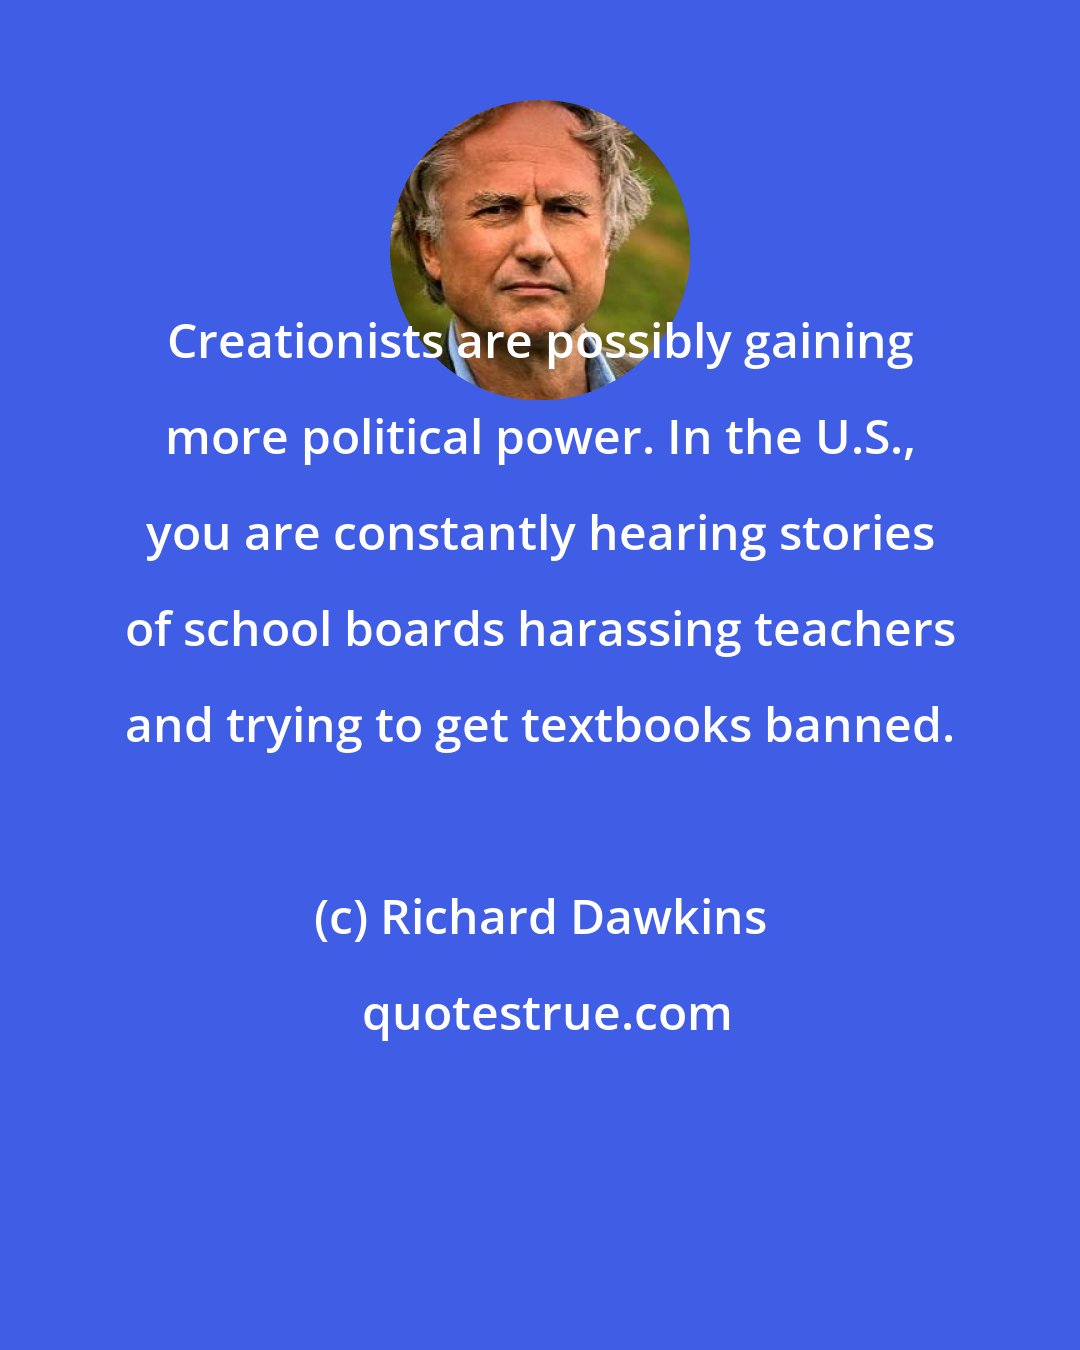 Richard Dawkins: Creationists are possibly gaining more political power. In the U.S., you are constantly hearing stories of school boards harassing teachers and trying to get textbooks banned.